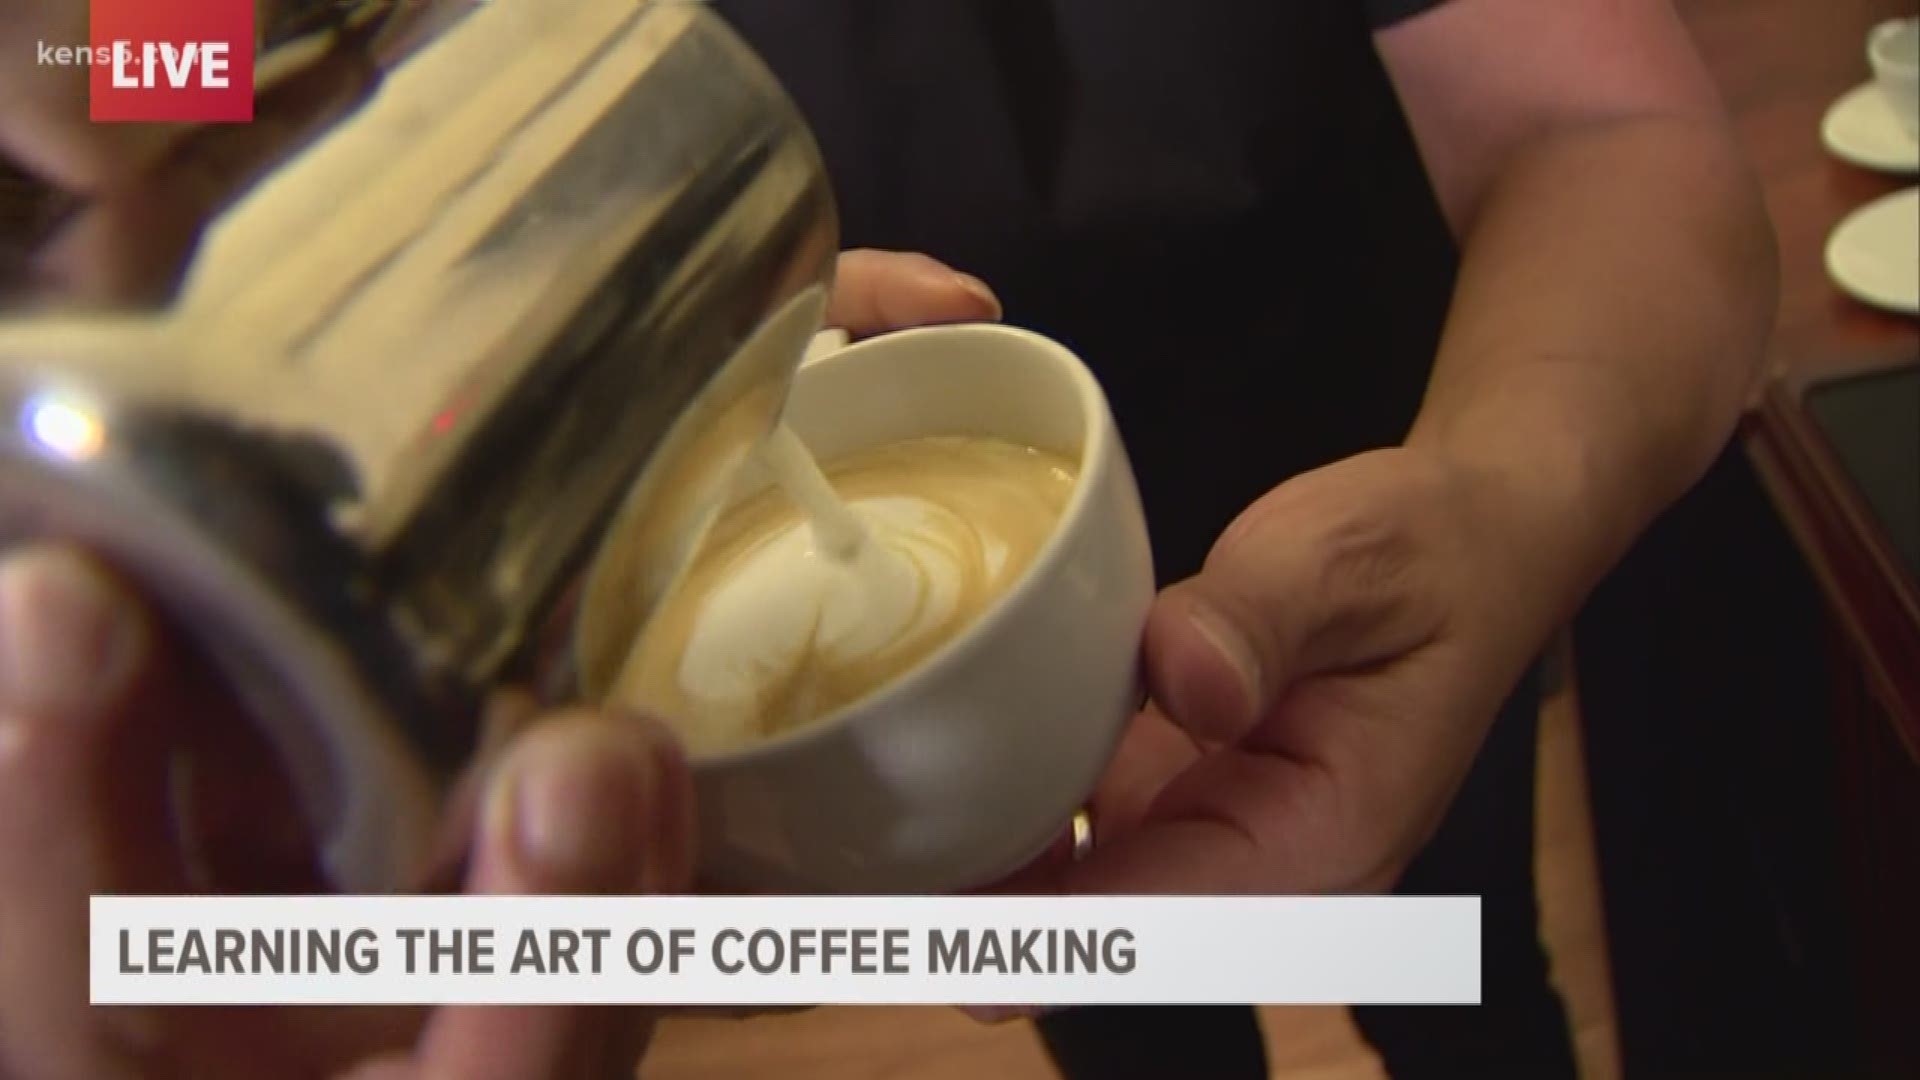 COFFEE LOVERS ALERT! You'll want to check this out.